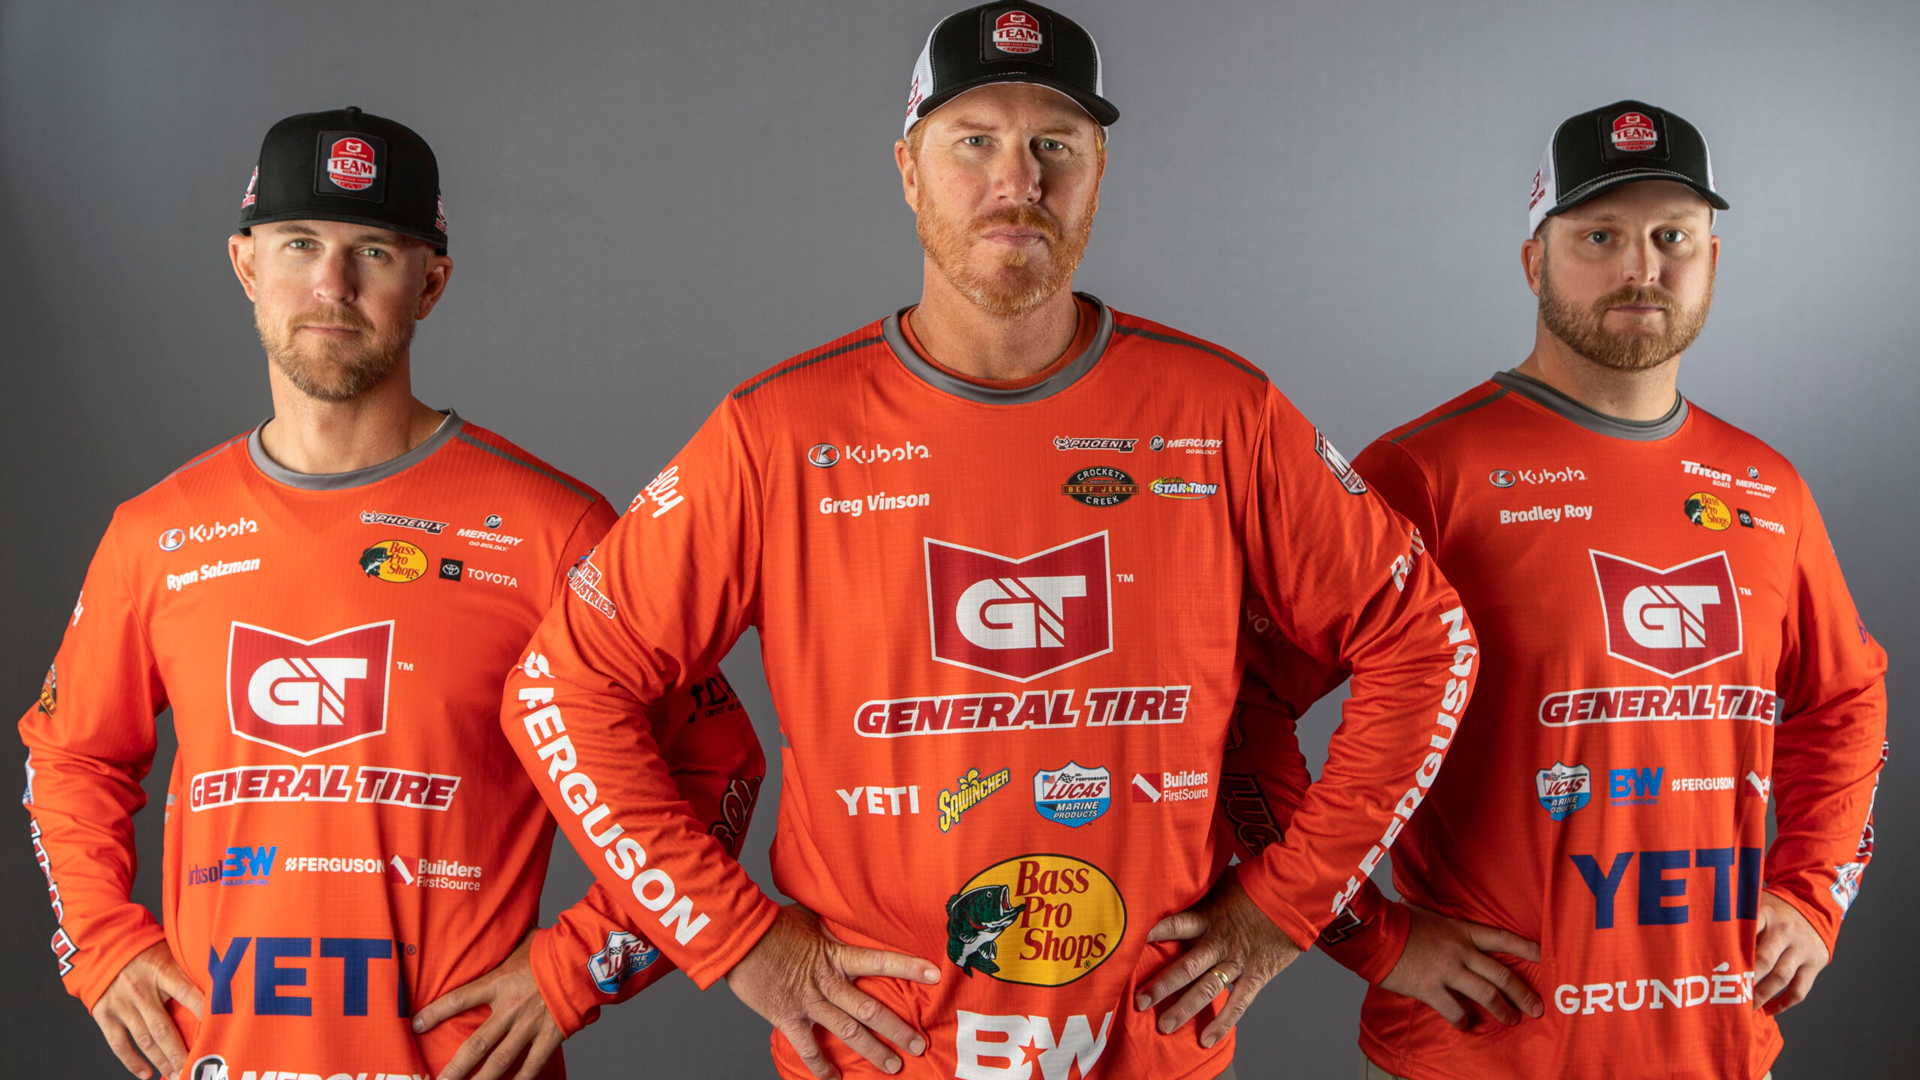 MLF General Tire Team Series Costa Qualifier Presented by Toyota Set to  Premiere Saturday on Outdoor Channel – Anglers Channel